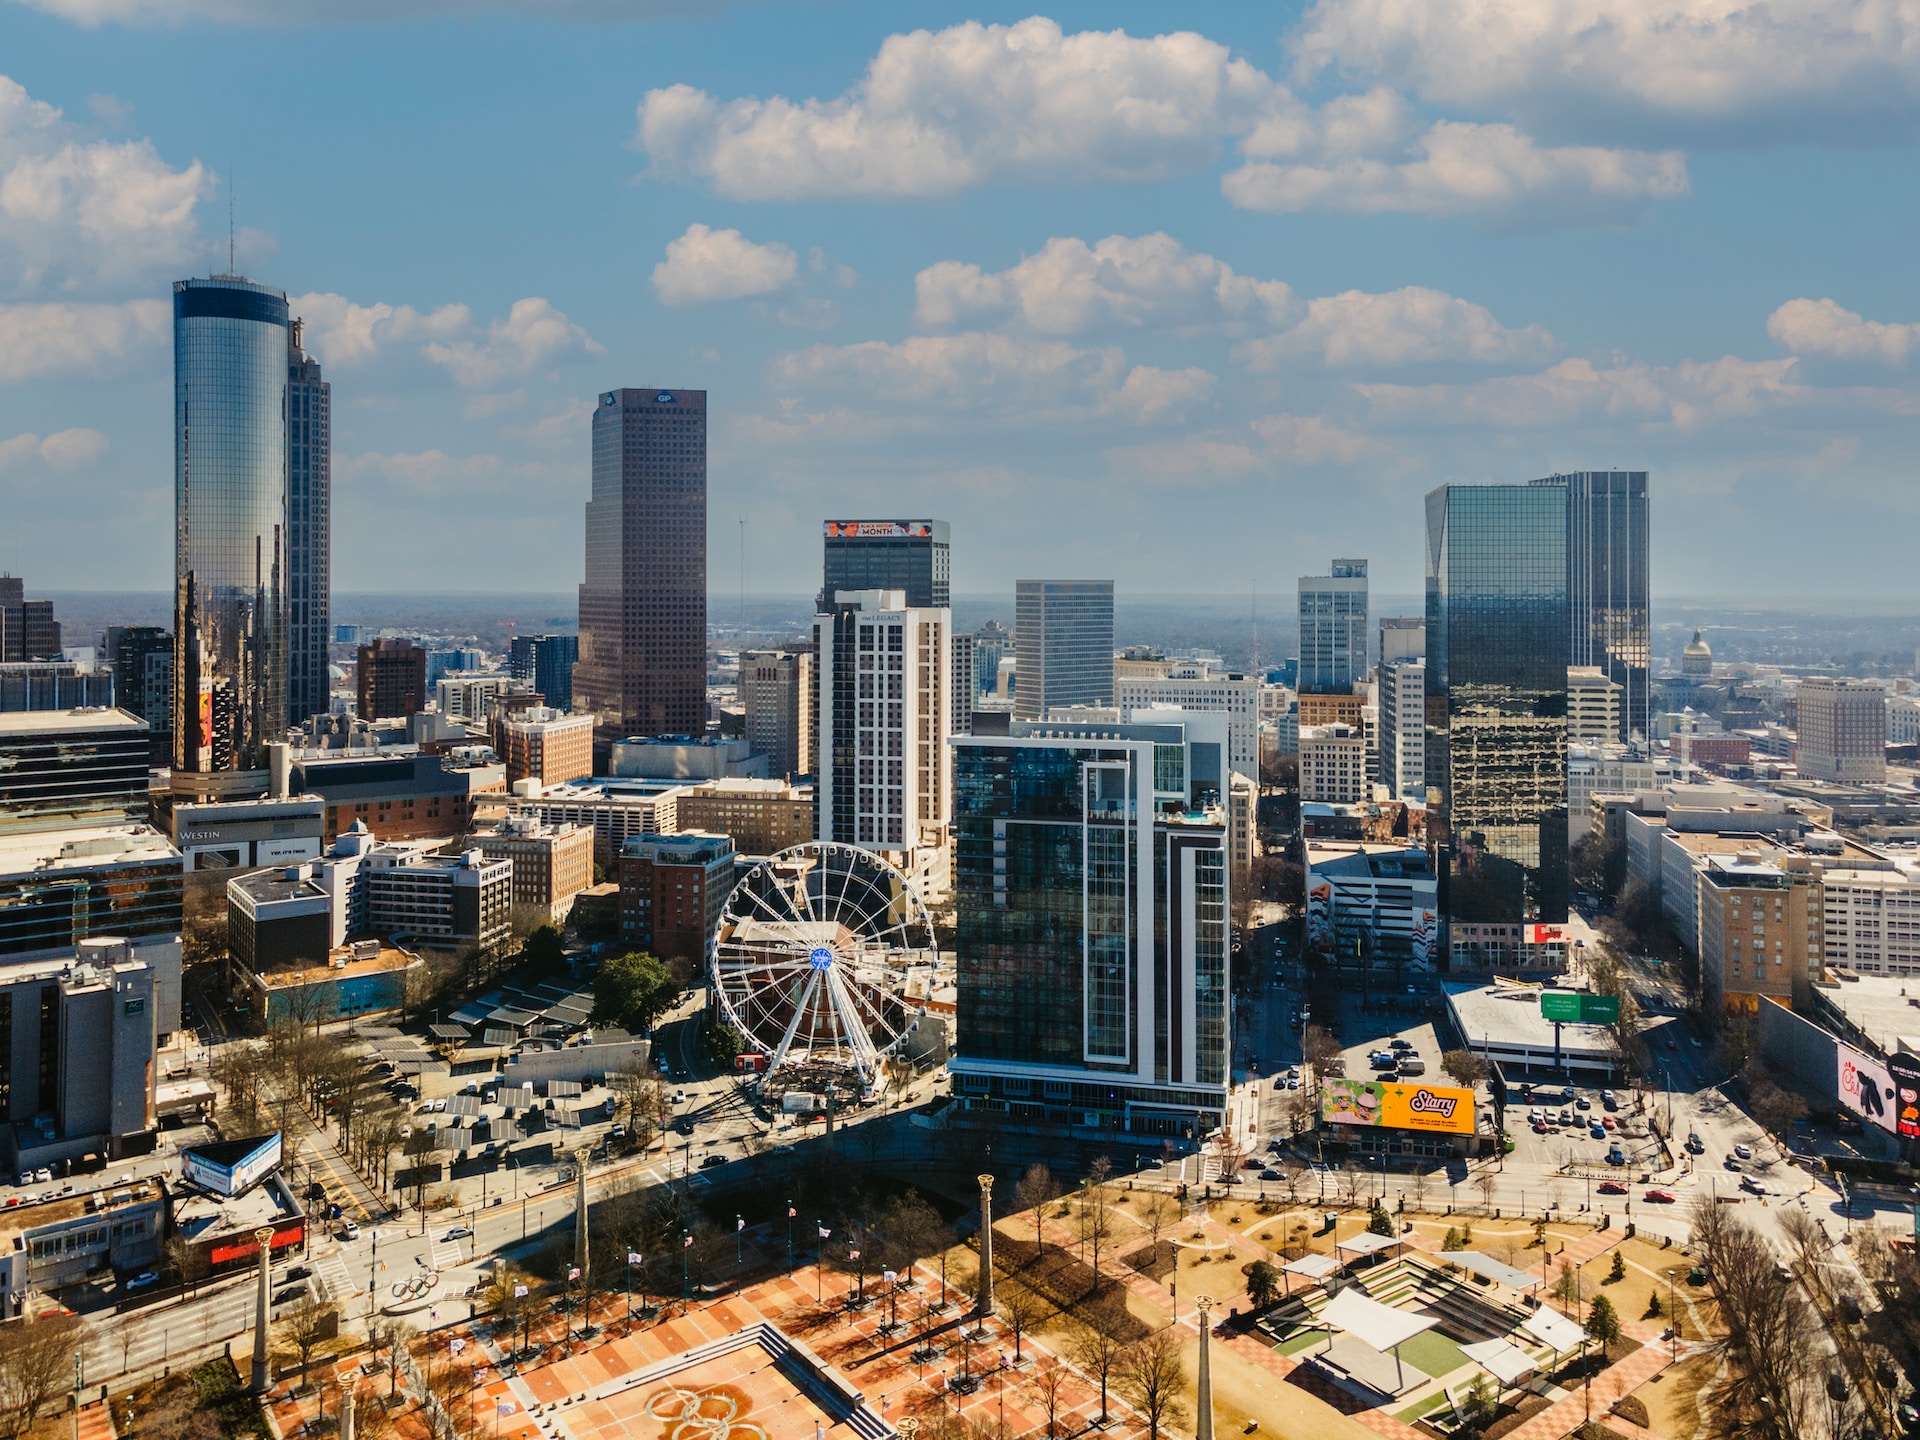 Aerial view of downtown Atlanta skyline during the daytime. The ferris wheel and several tall, glass skyscrapers are pictured.